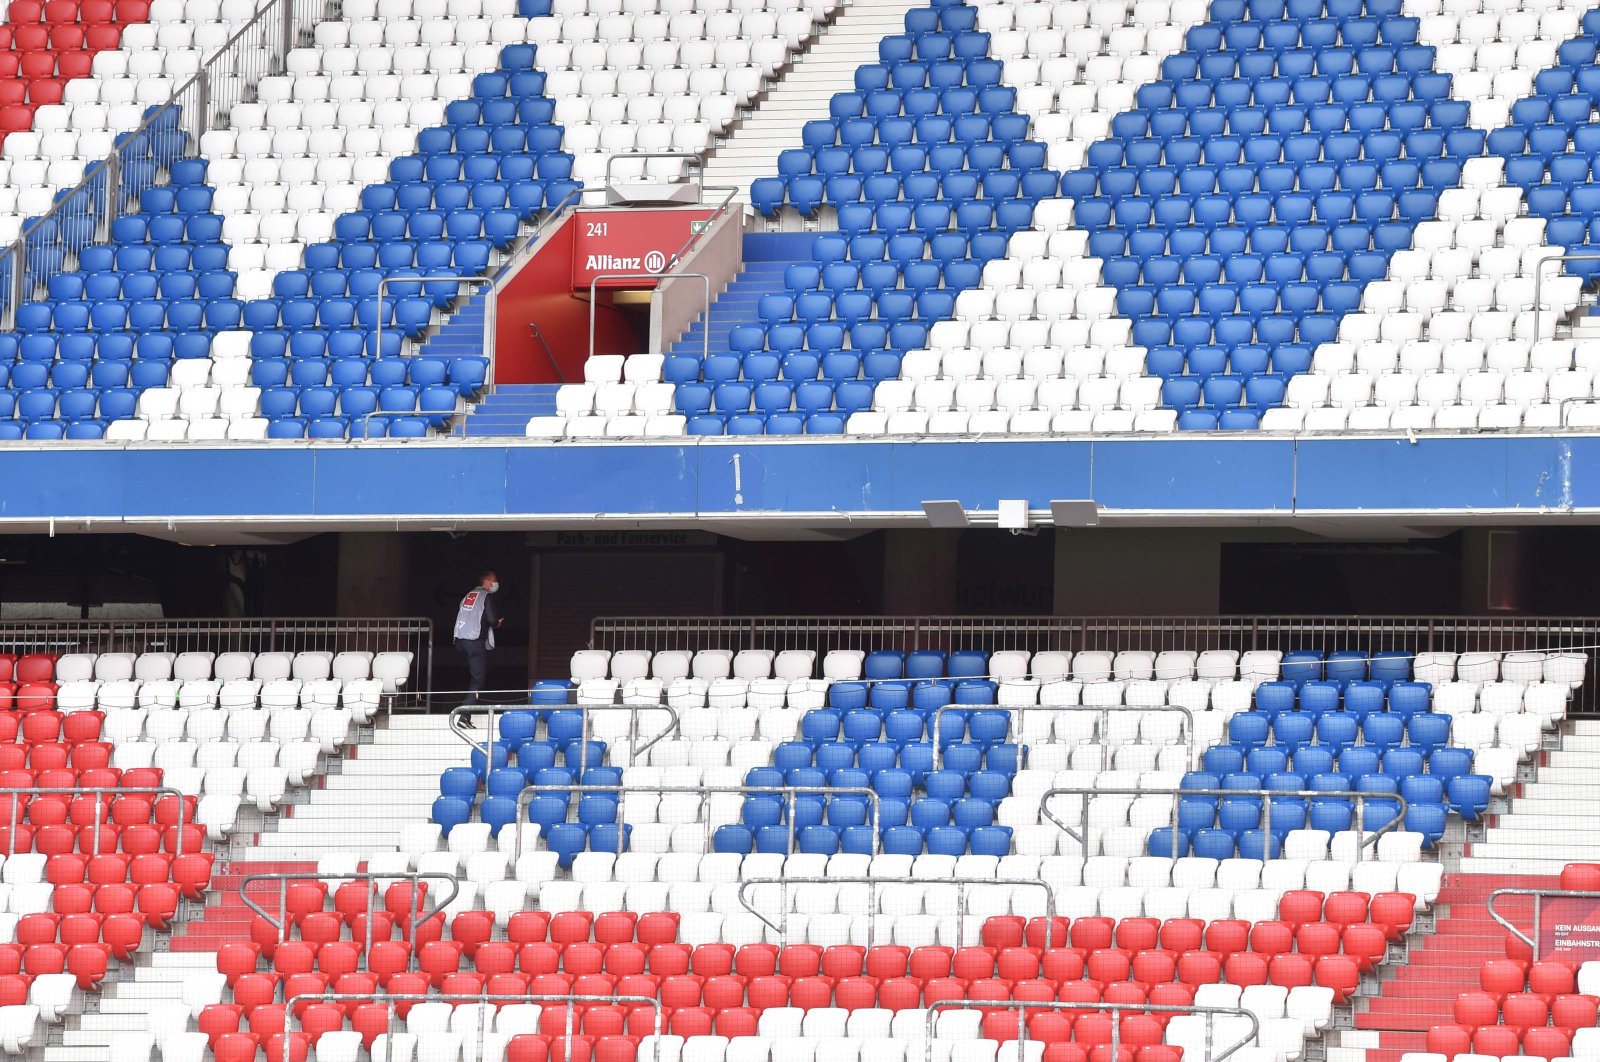 A staff member is seen in the empty stands prior to a Bundesliga football match between FC Bayern Munich and Hertha Berlin at Allianz Arena in Munich, Germany, Oct. 4, 2020. (AFP Photo)